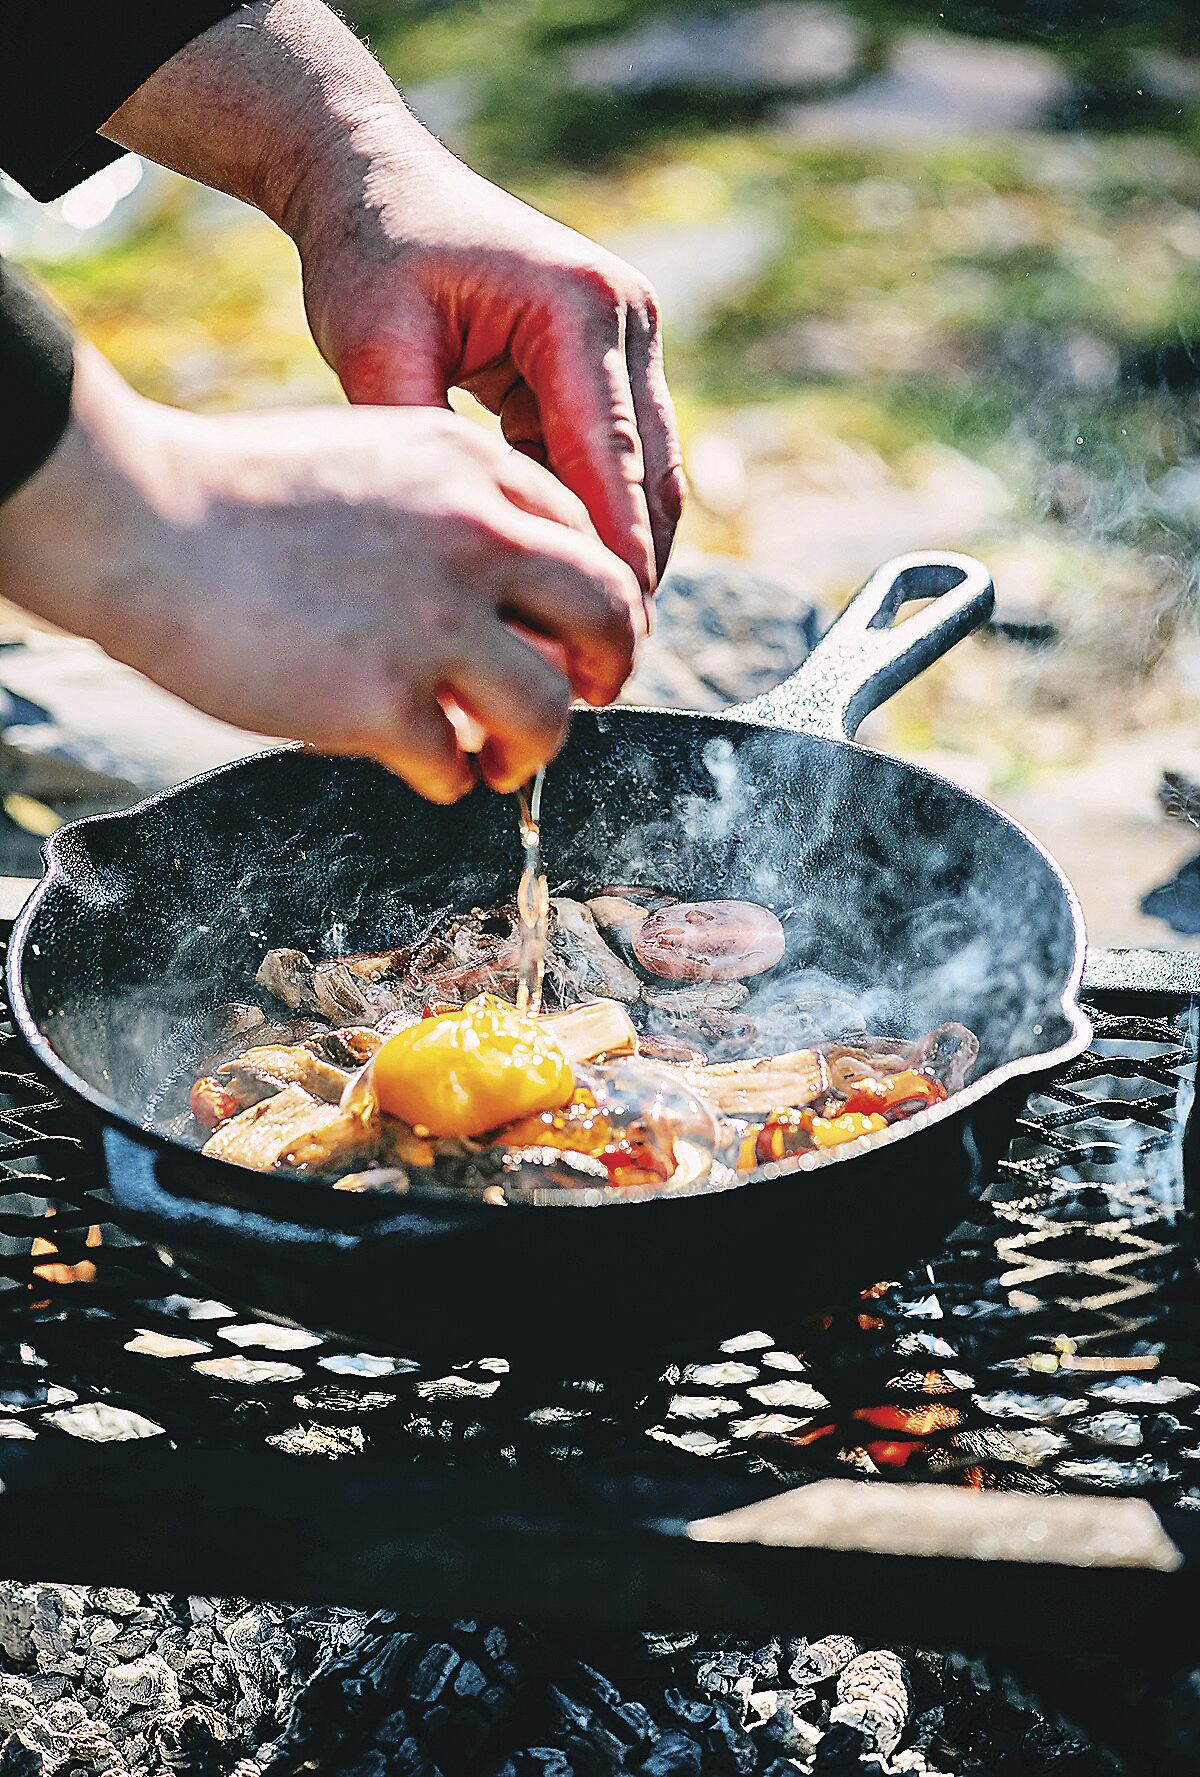 What Is The Best Way To Cook Food While Camping